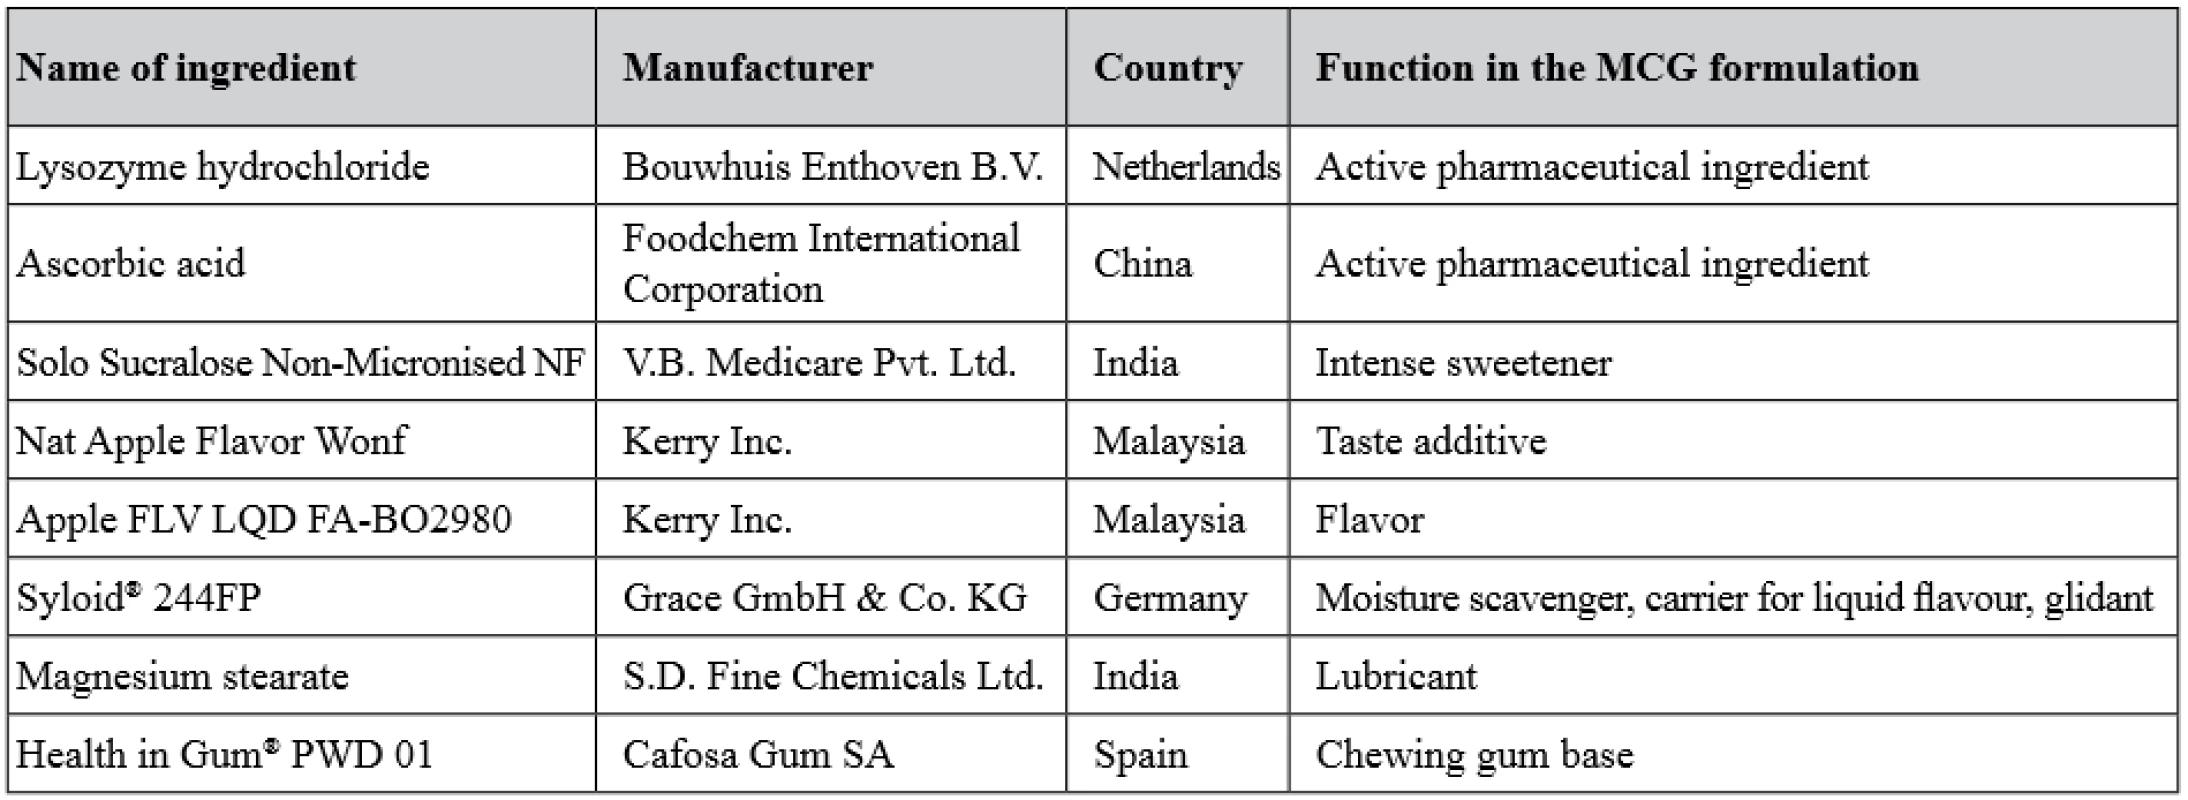 Description of APIs and excipients used in the study 